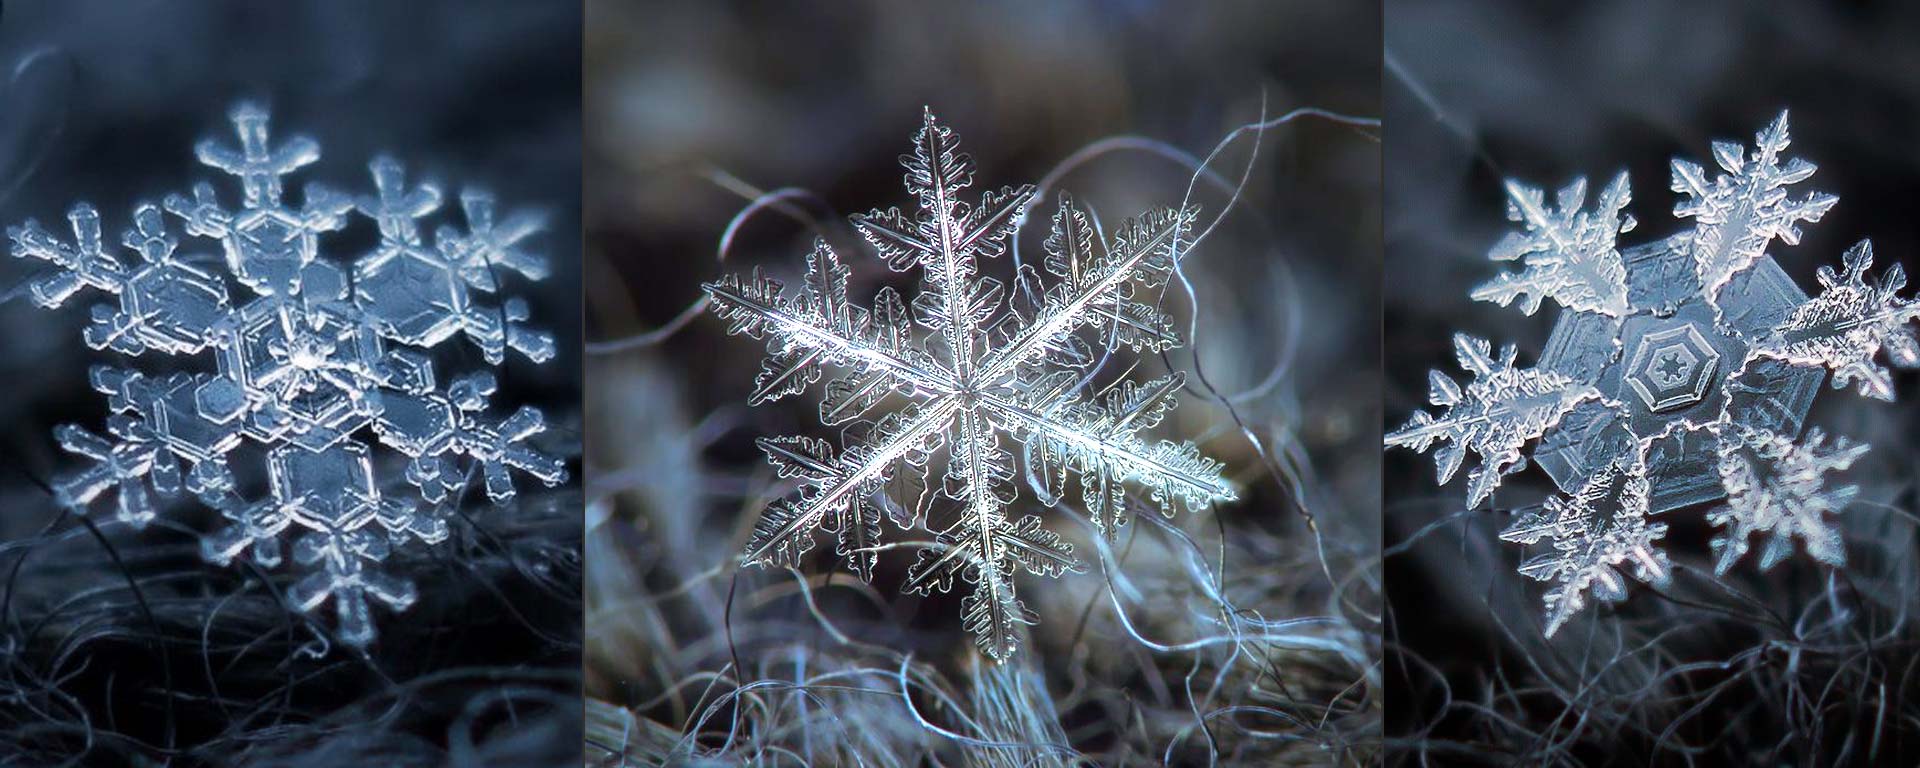 Featured_Natural_Beauty_of_Snowflakes.jp